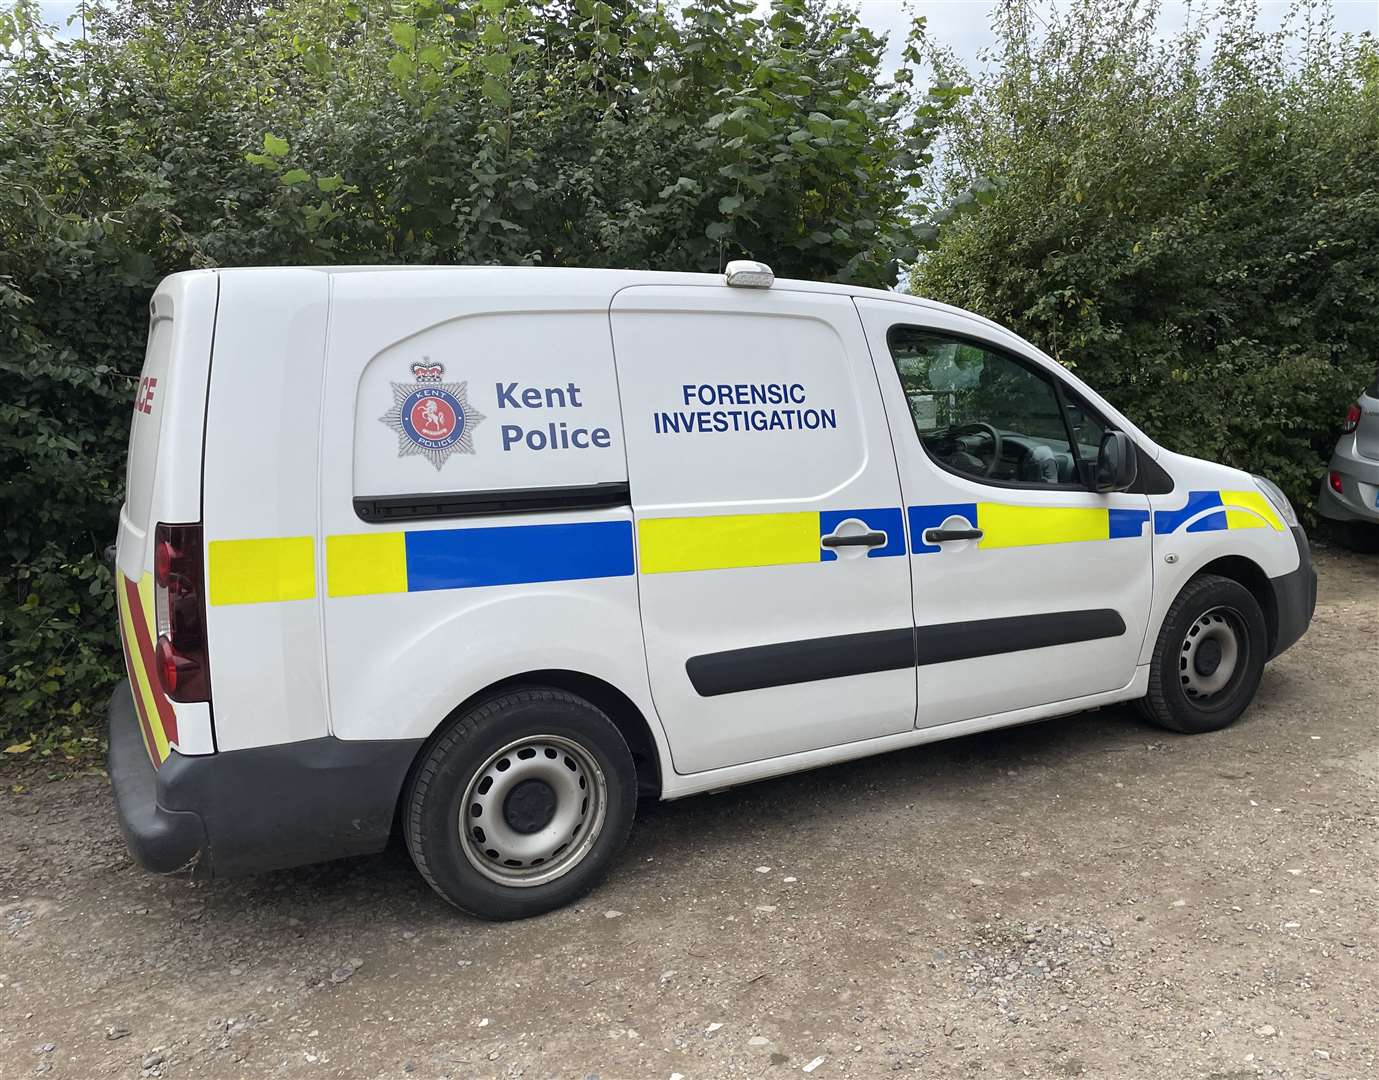 Forensic officers were called to the property in West Malling